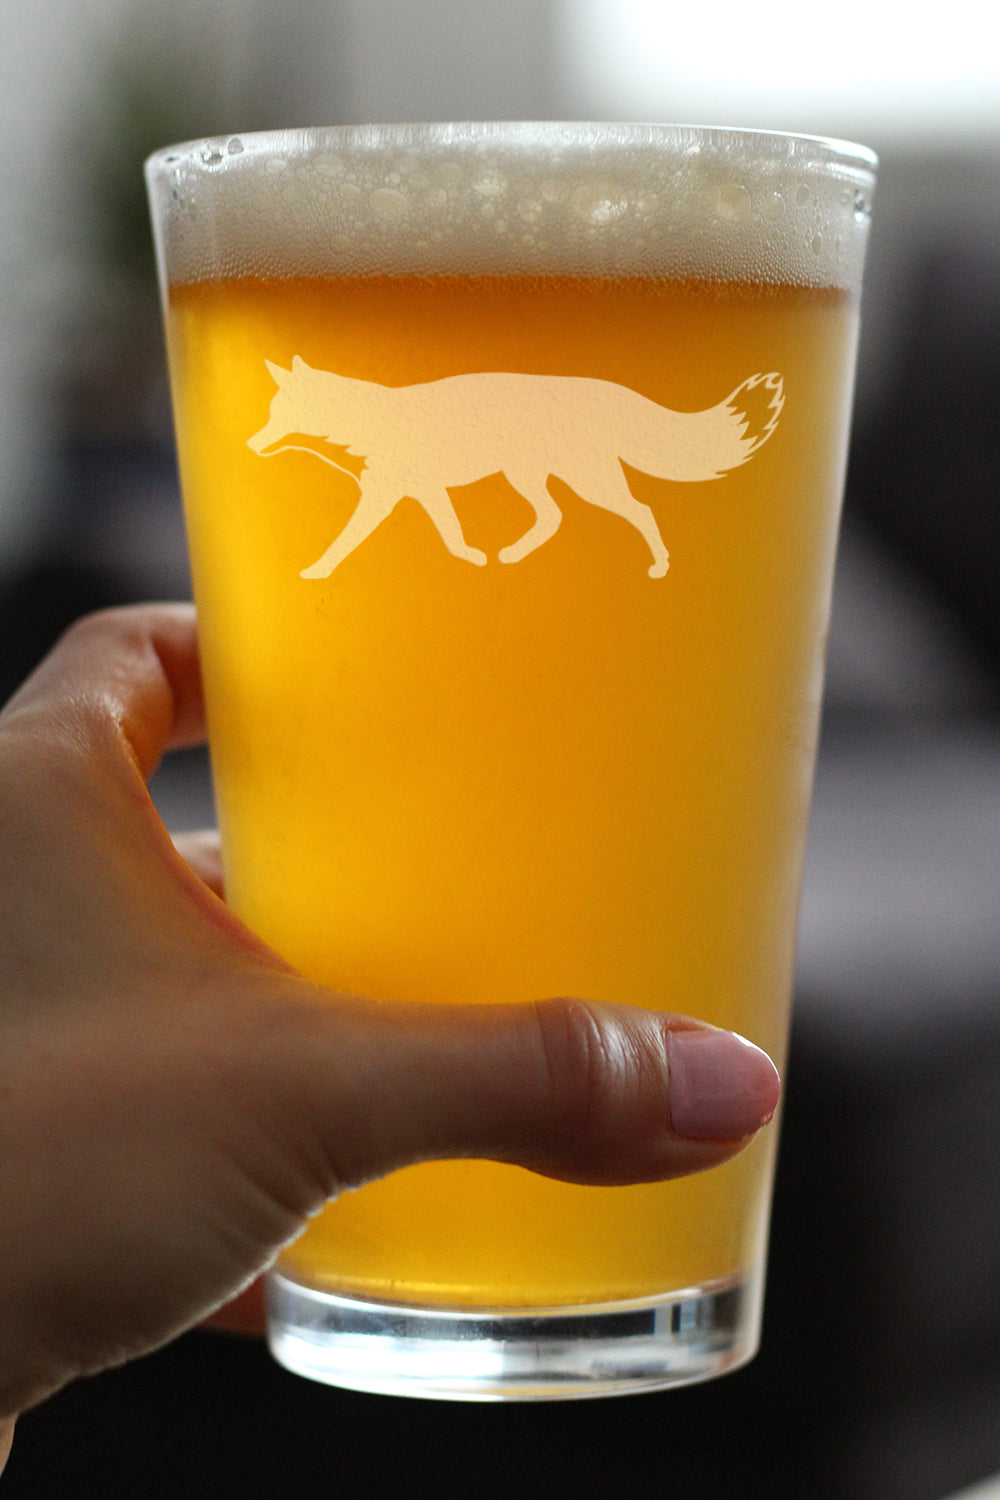 Fox Silhouette Pint Glass for Beer - Cabin Themed Fox Gifts or Rustic Fox Decor for Women and Men - 16 Oz Glasses